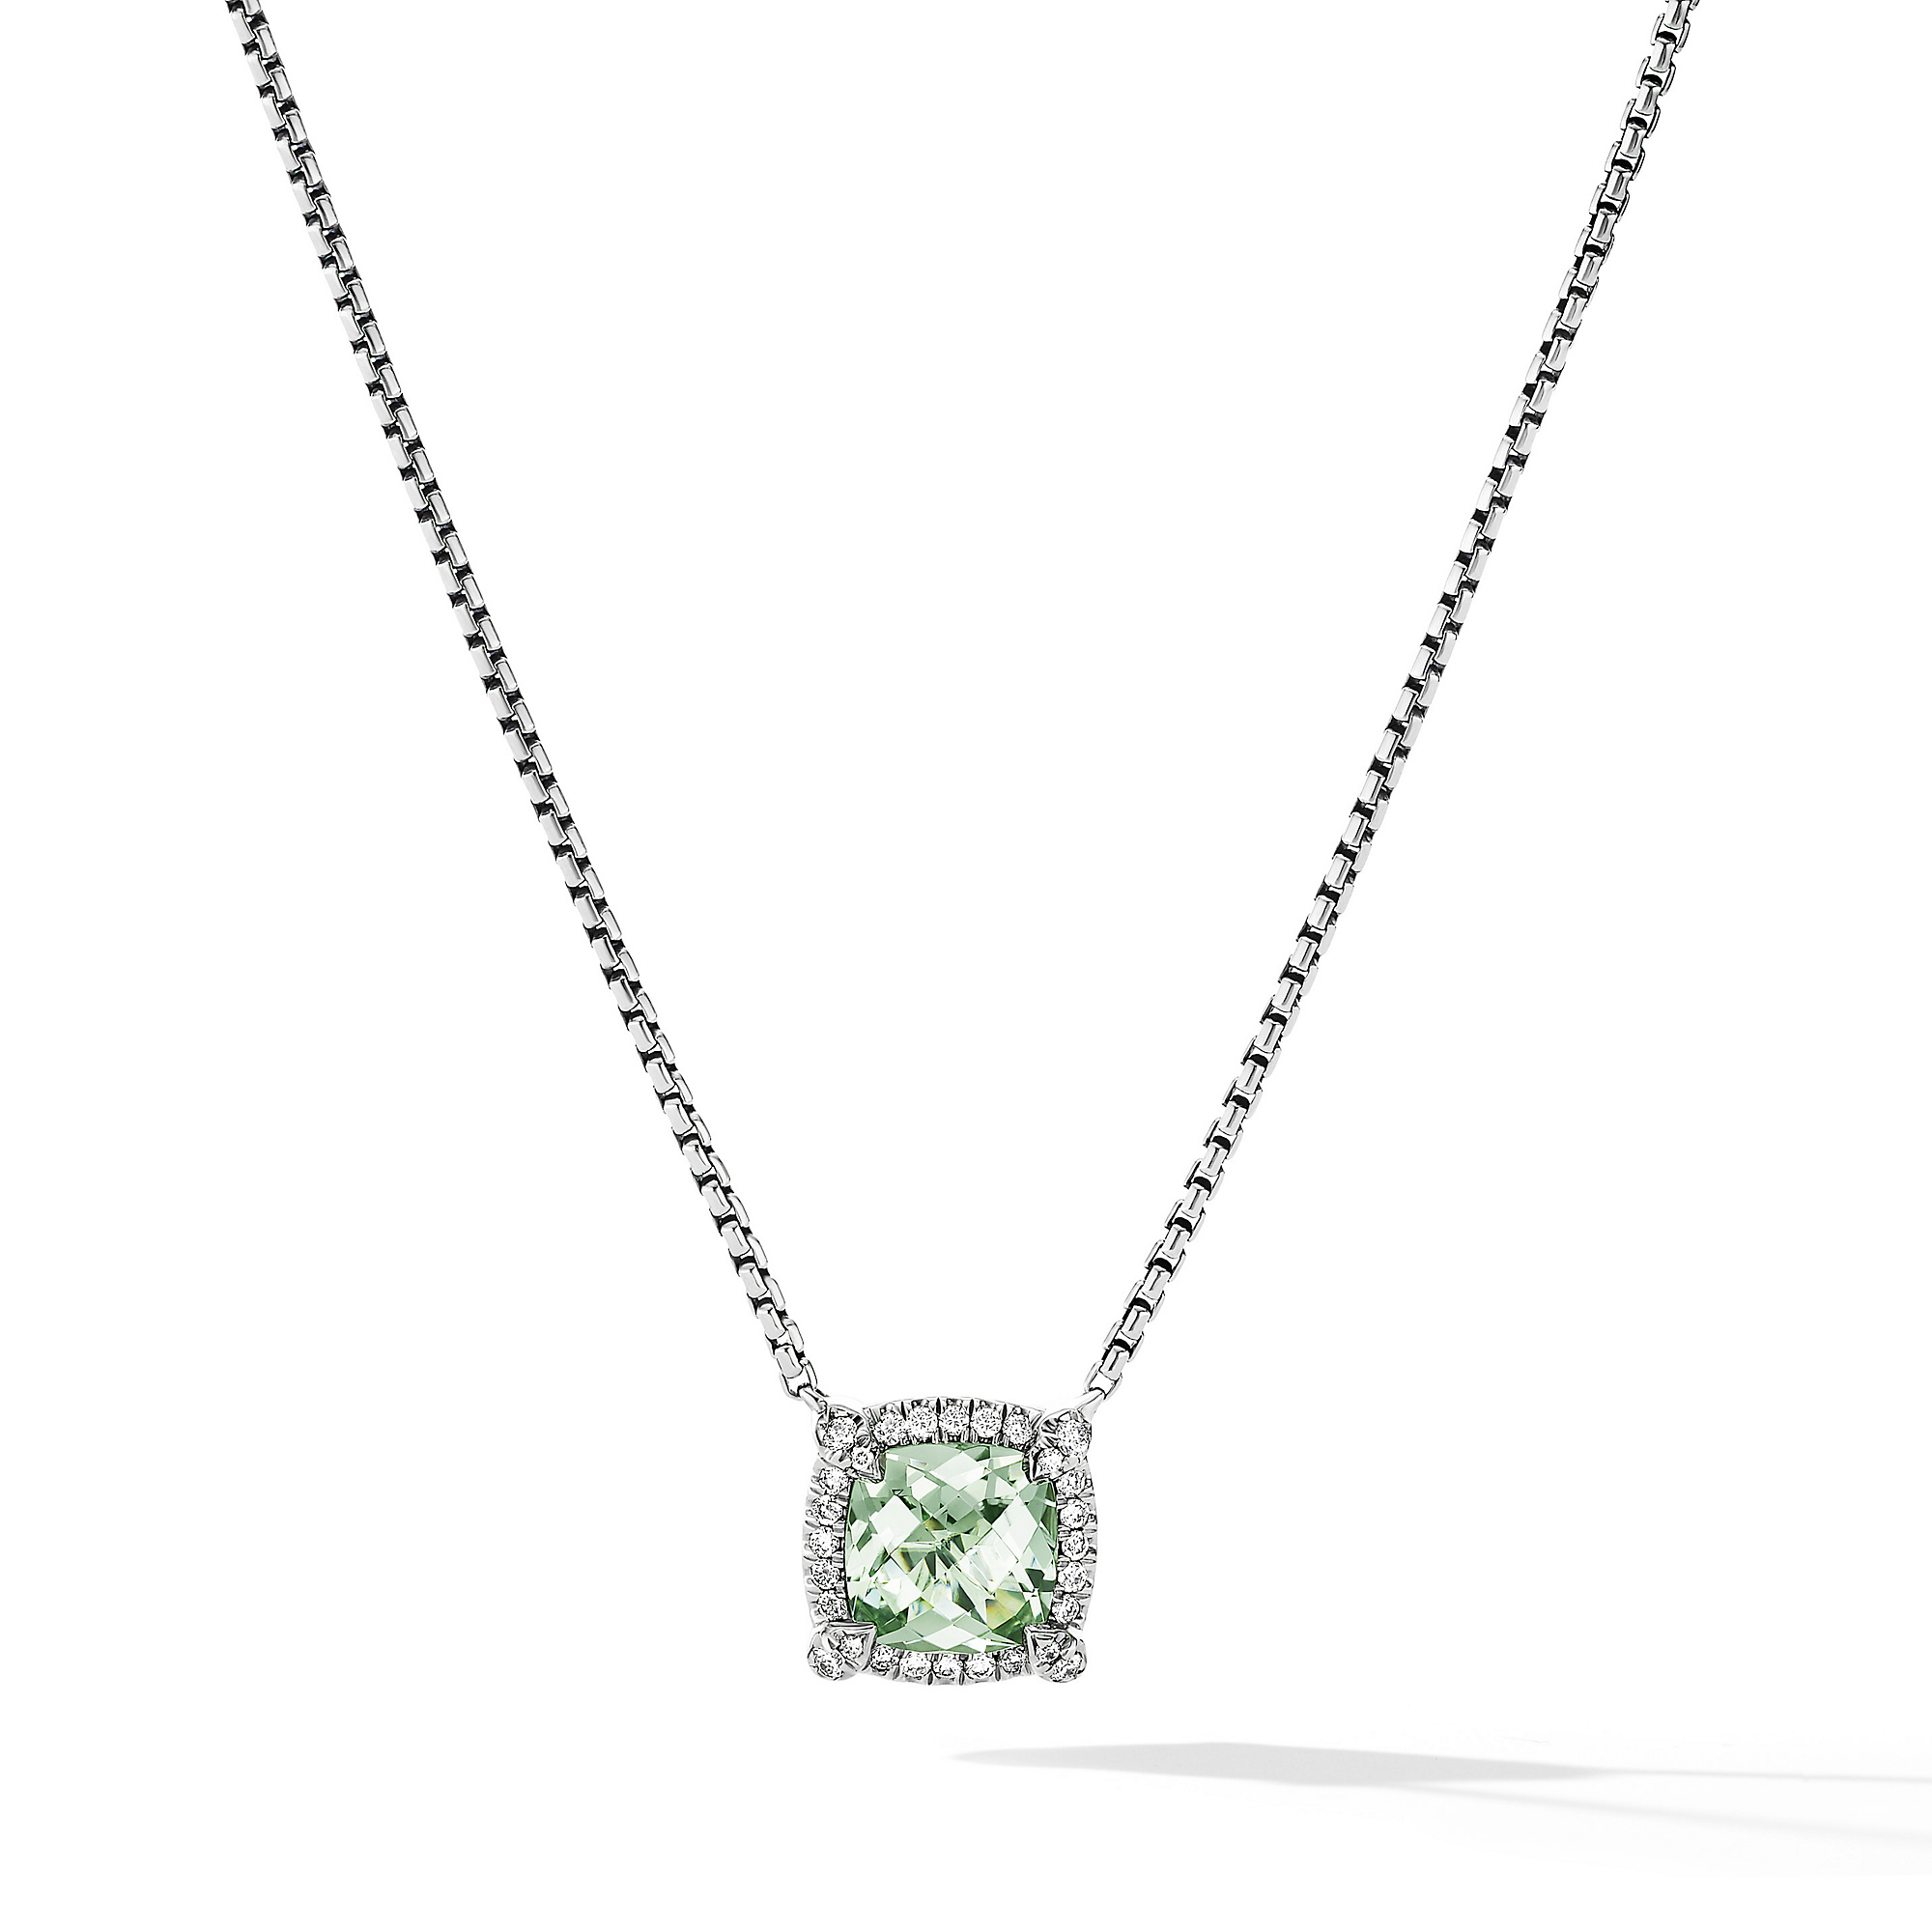 Petite Chatelaine® Pave Bezel Pendant Necklace in Sterling Silver with Prasiolite and Diamonds